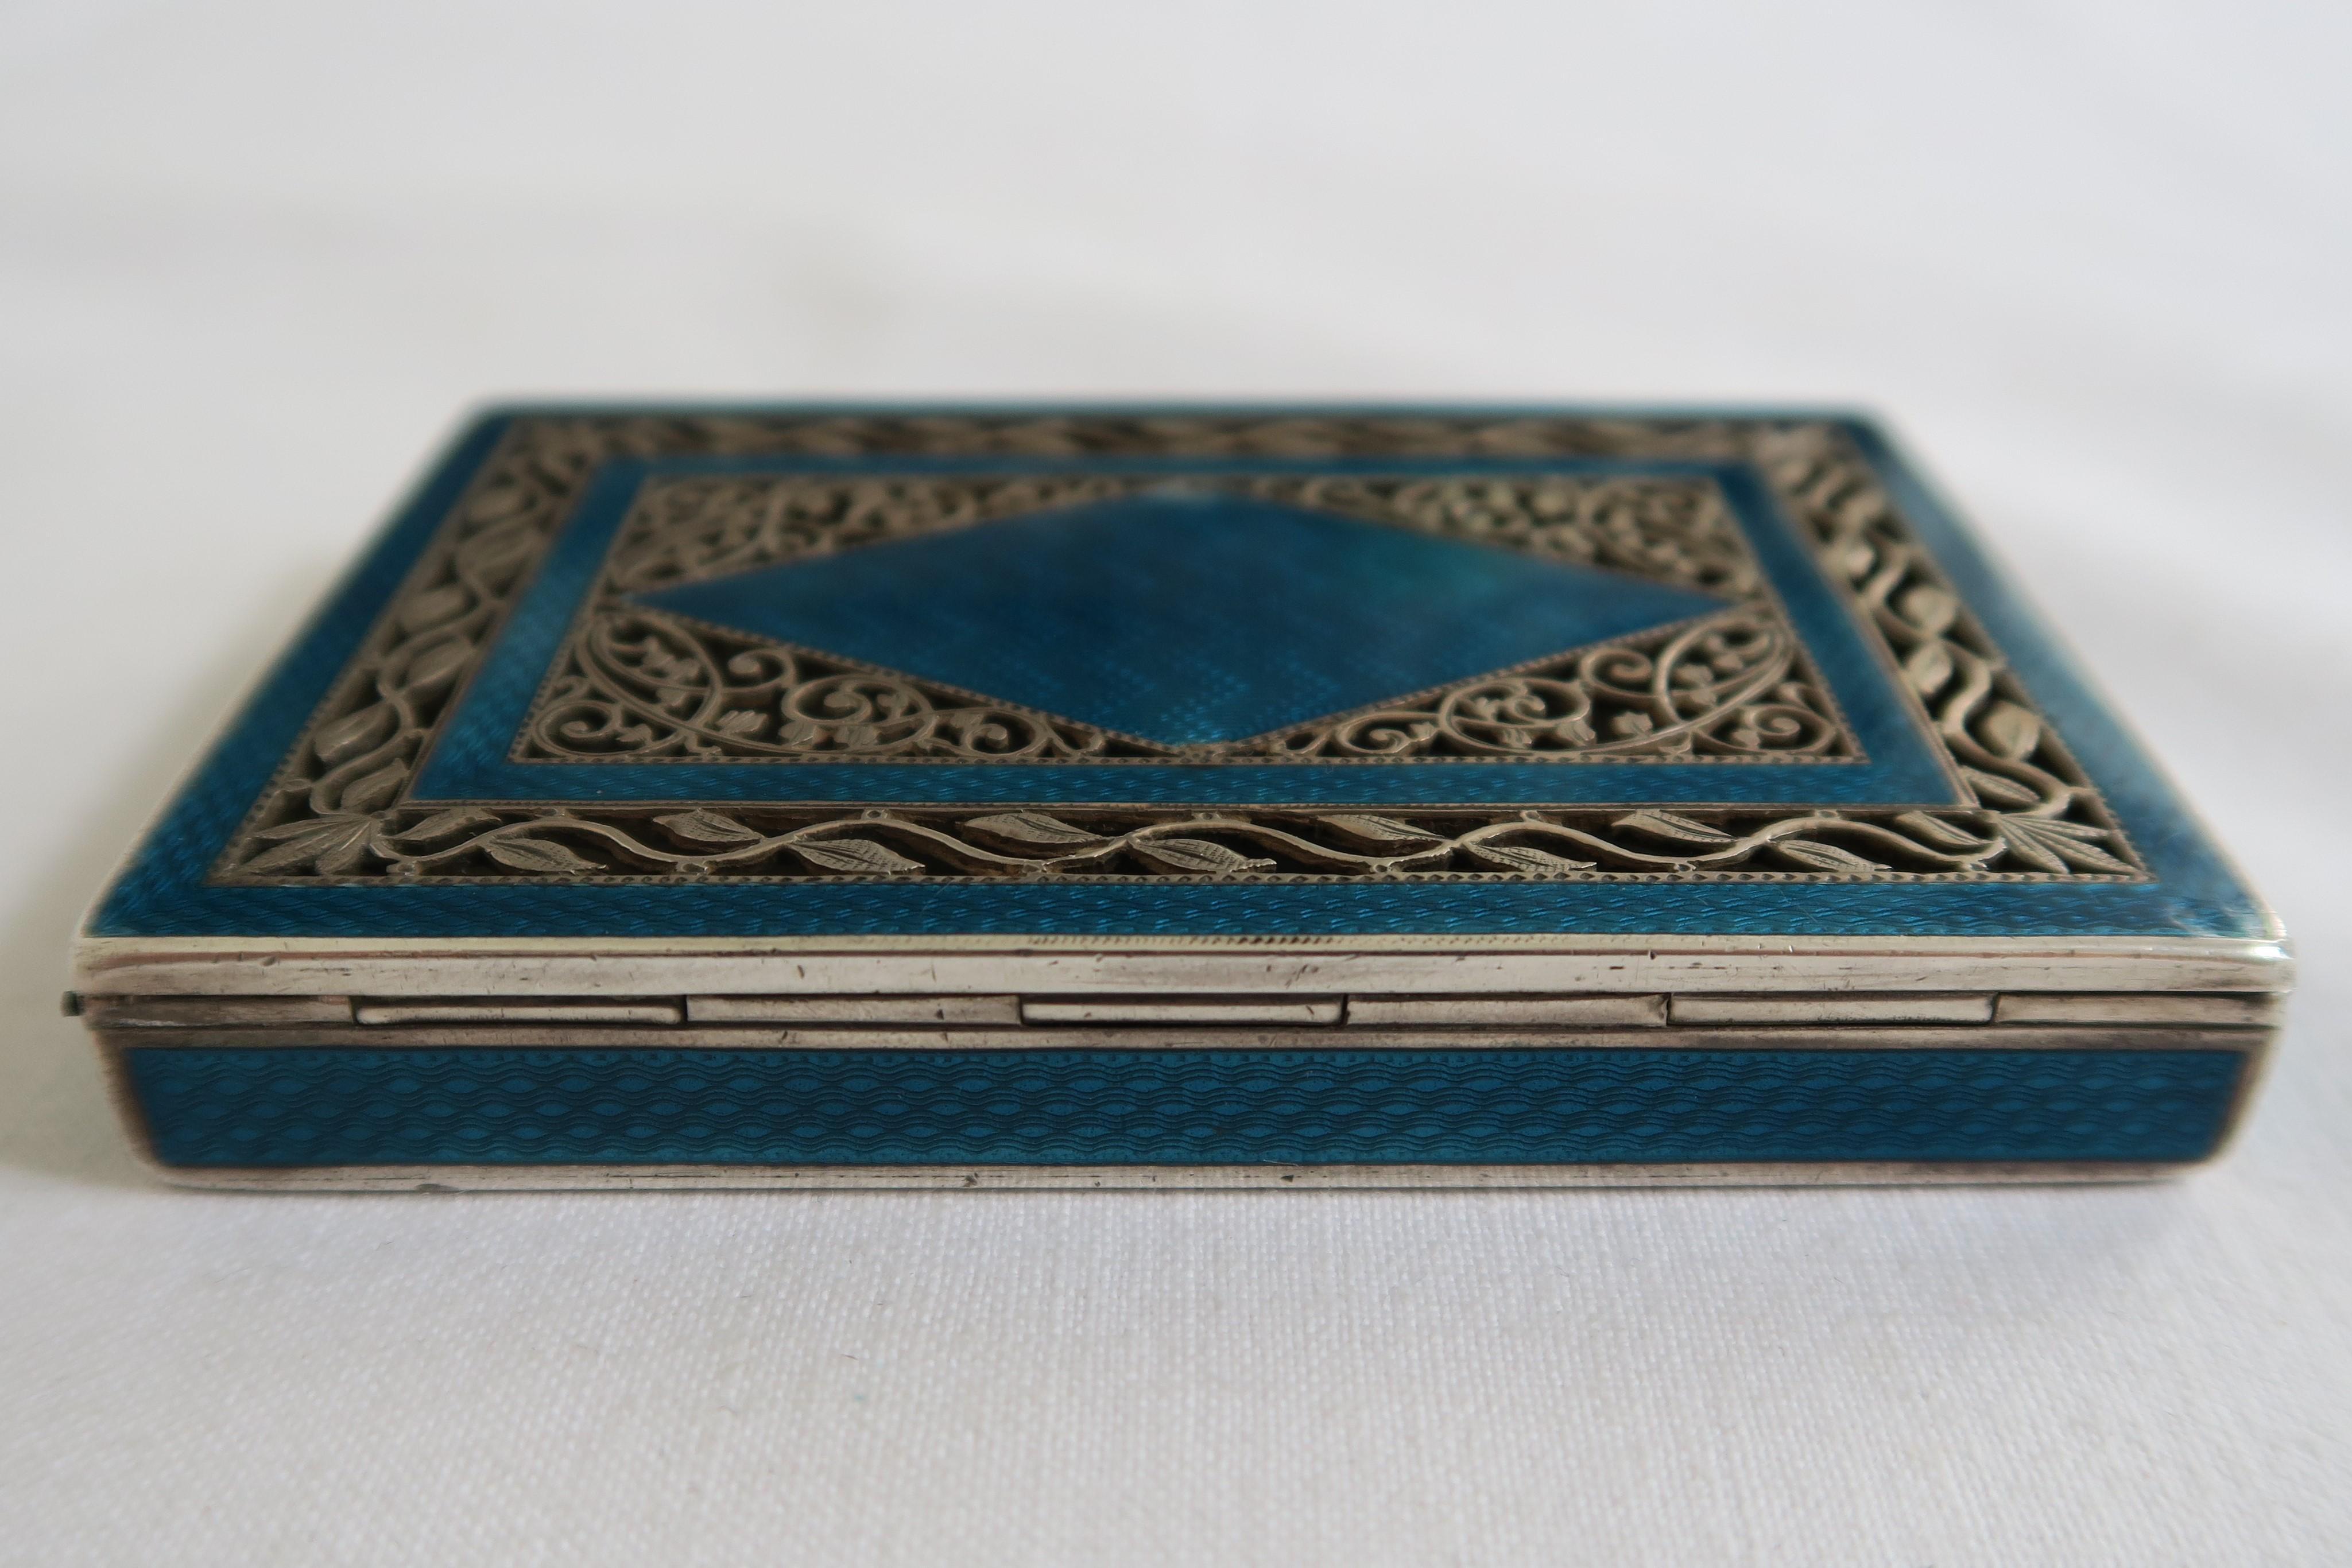 Hand-Crafted Antique Cigarette Box Silver and Turquoise Enamel with Lily of the Valley Motif For Sale